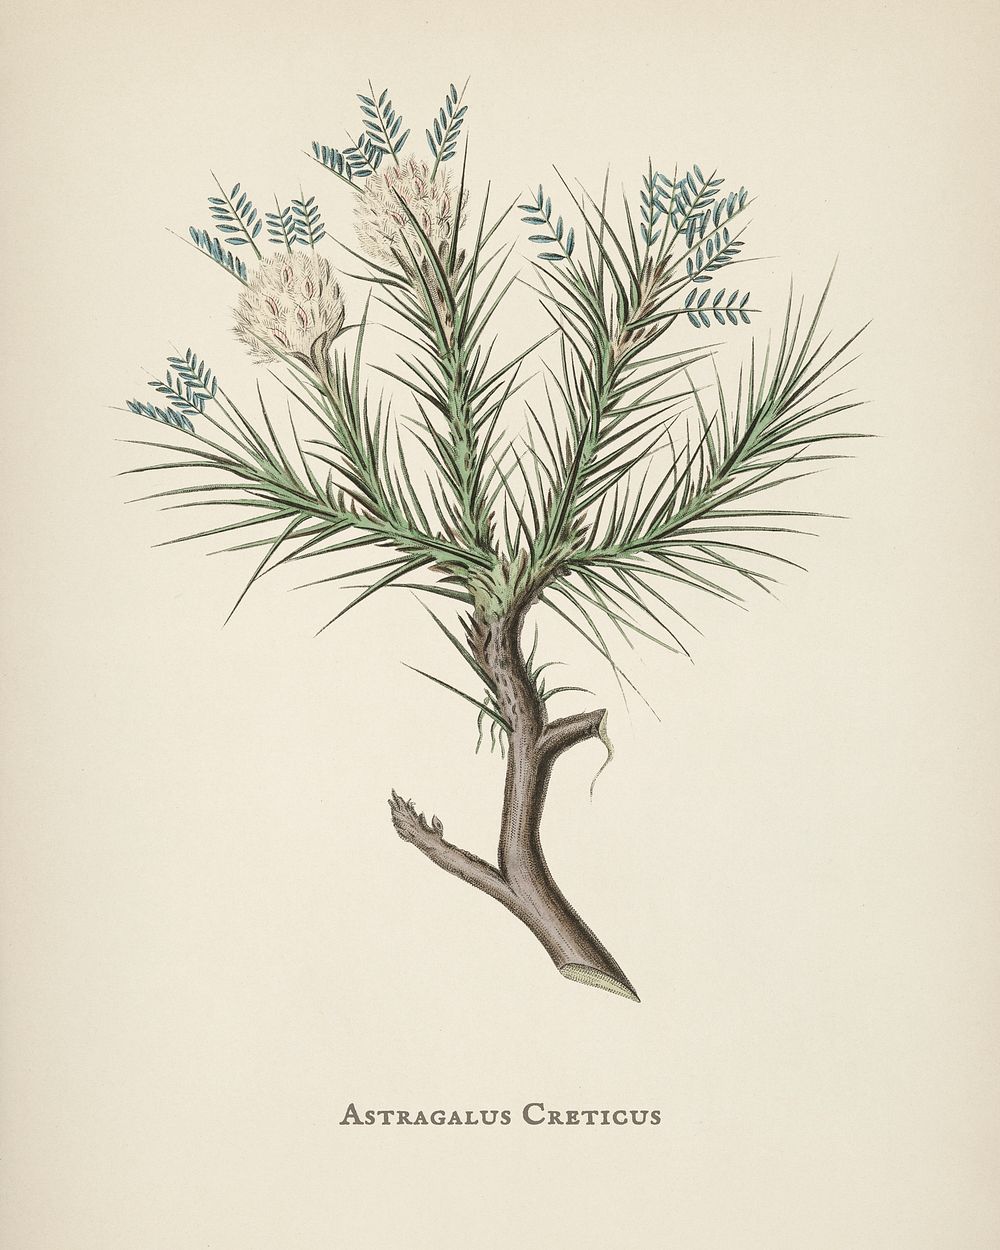 Astragalus creticus illustration from Medical Botany (1836) by John Stephenson and James Morss Churchill.